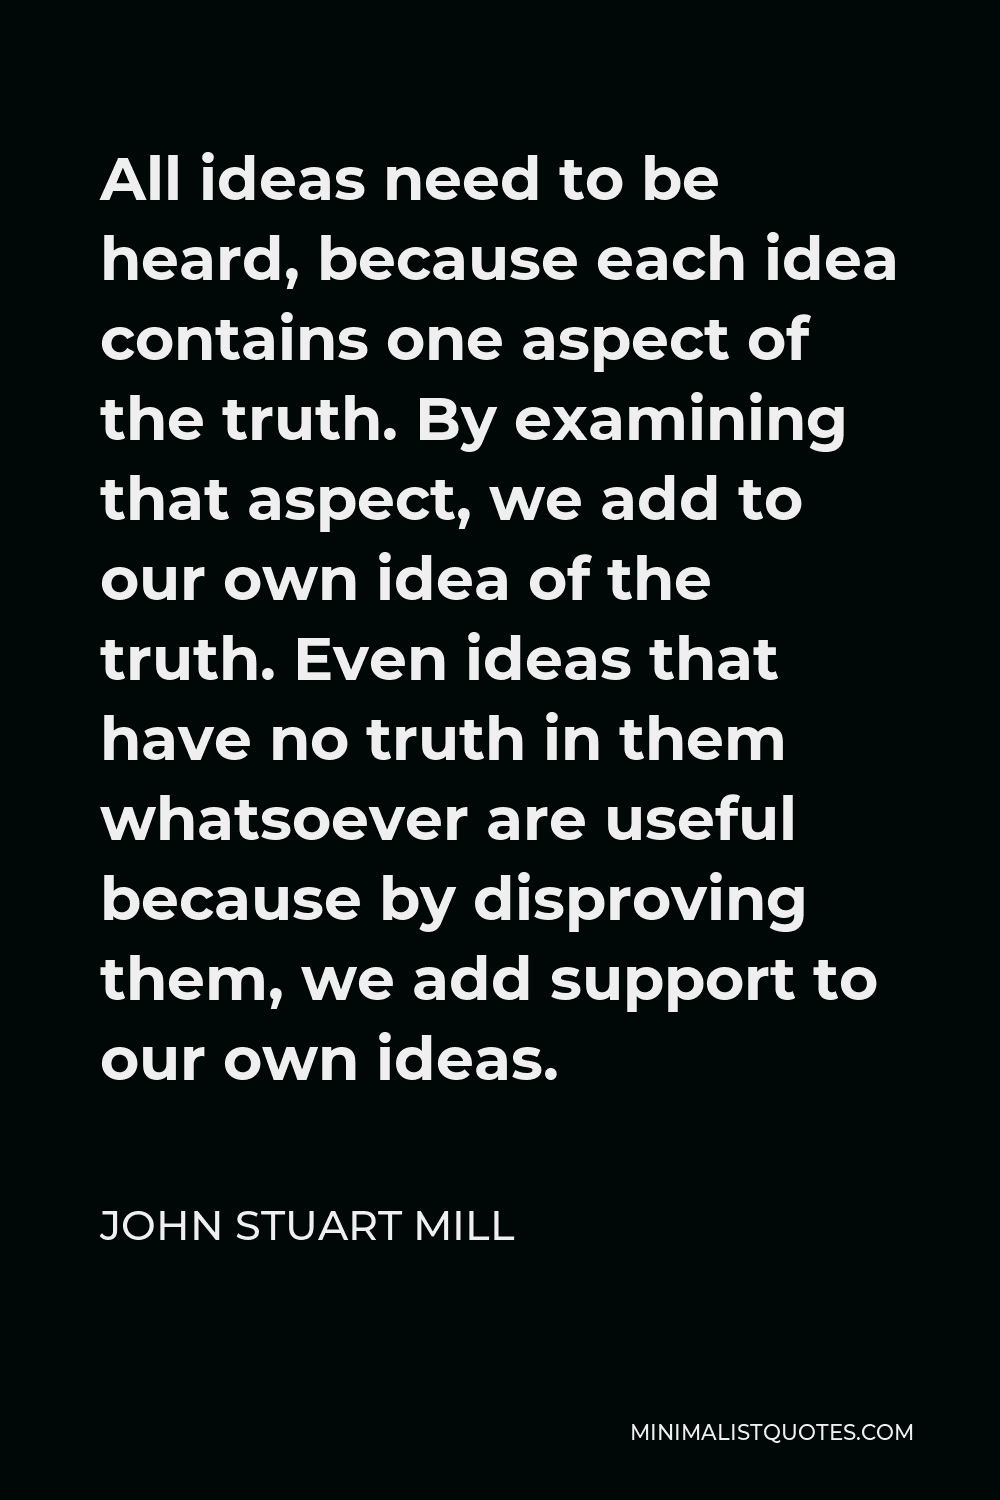 John Stuart Mill Quote - All ideas need to be heard, because each idea contains one aspect of the truth. By examining that aspect, we add to our own idea of the truth. Even ideas that have no truth in them whatsoever are useful because by disproving them, we add support to our own ideas.